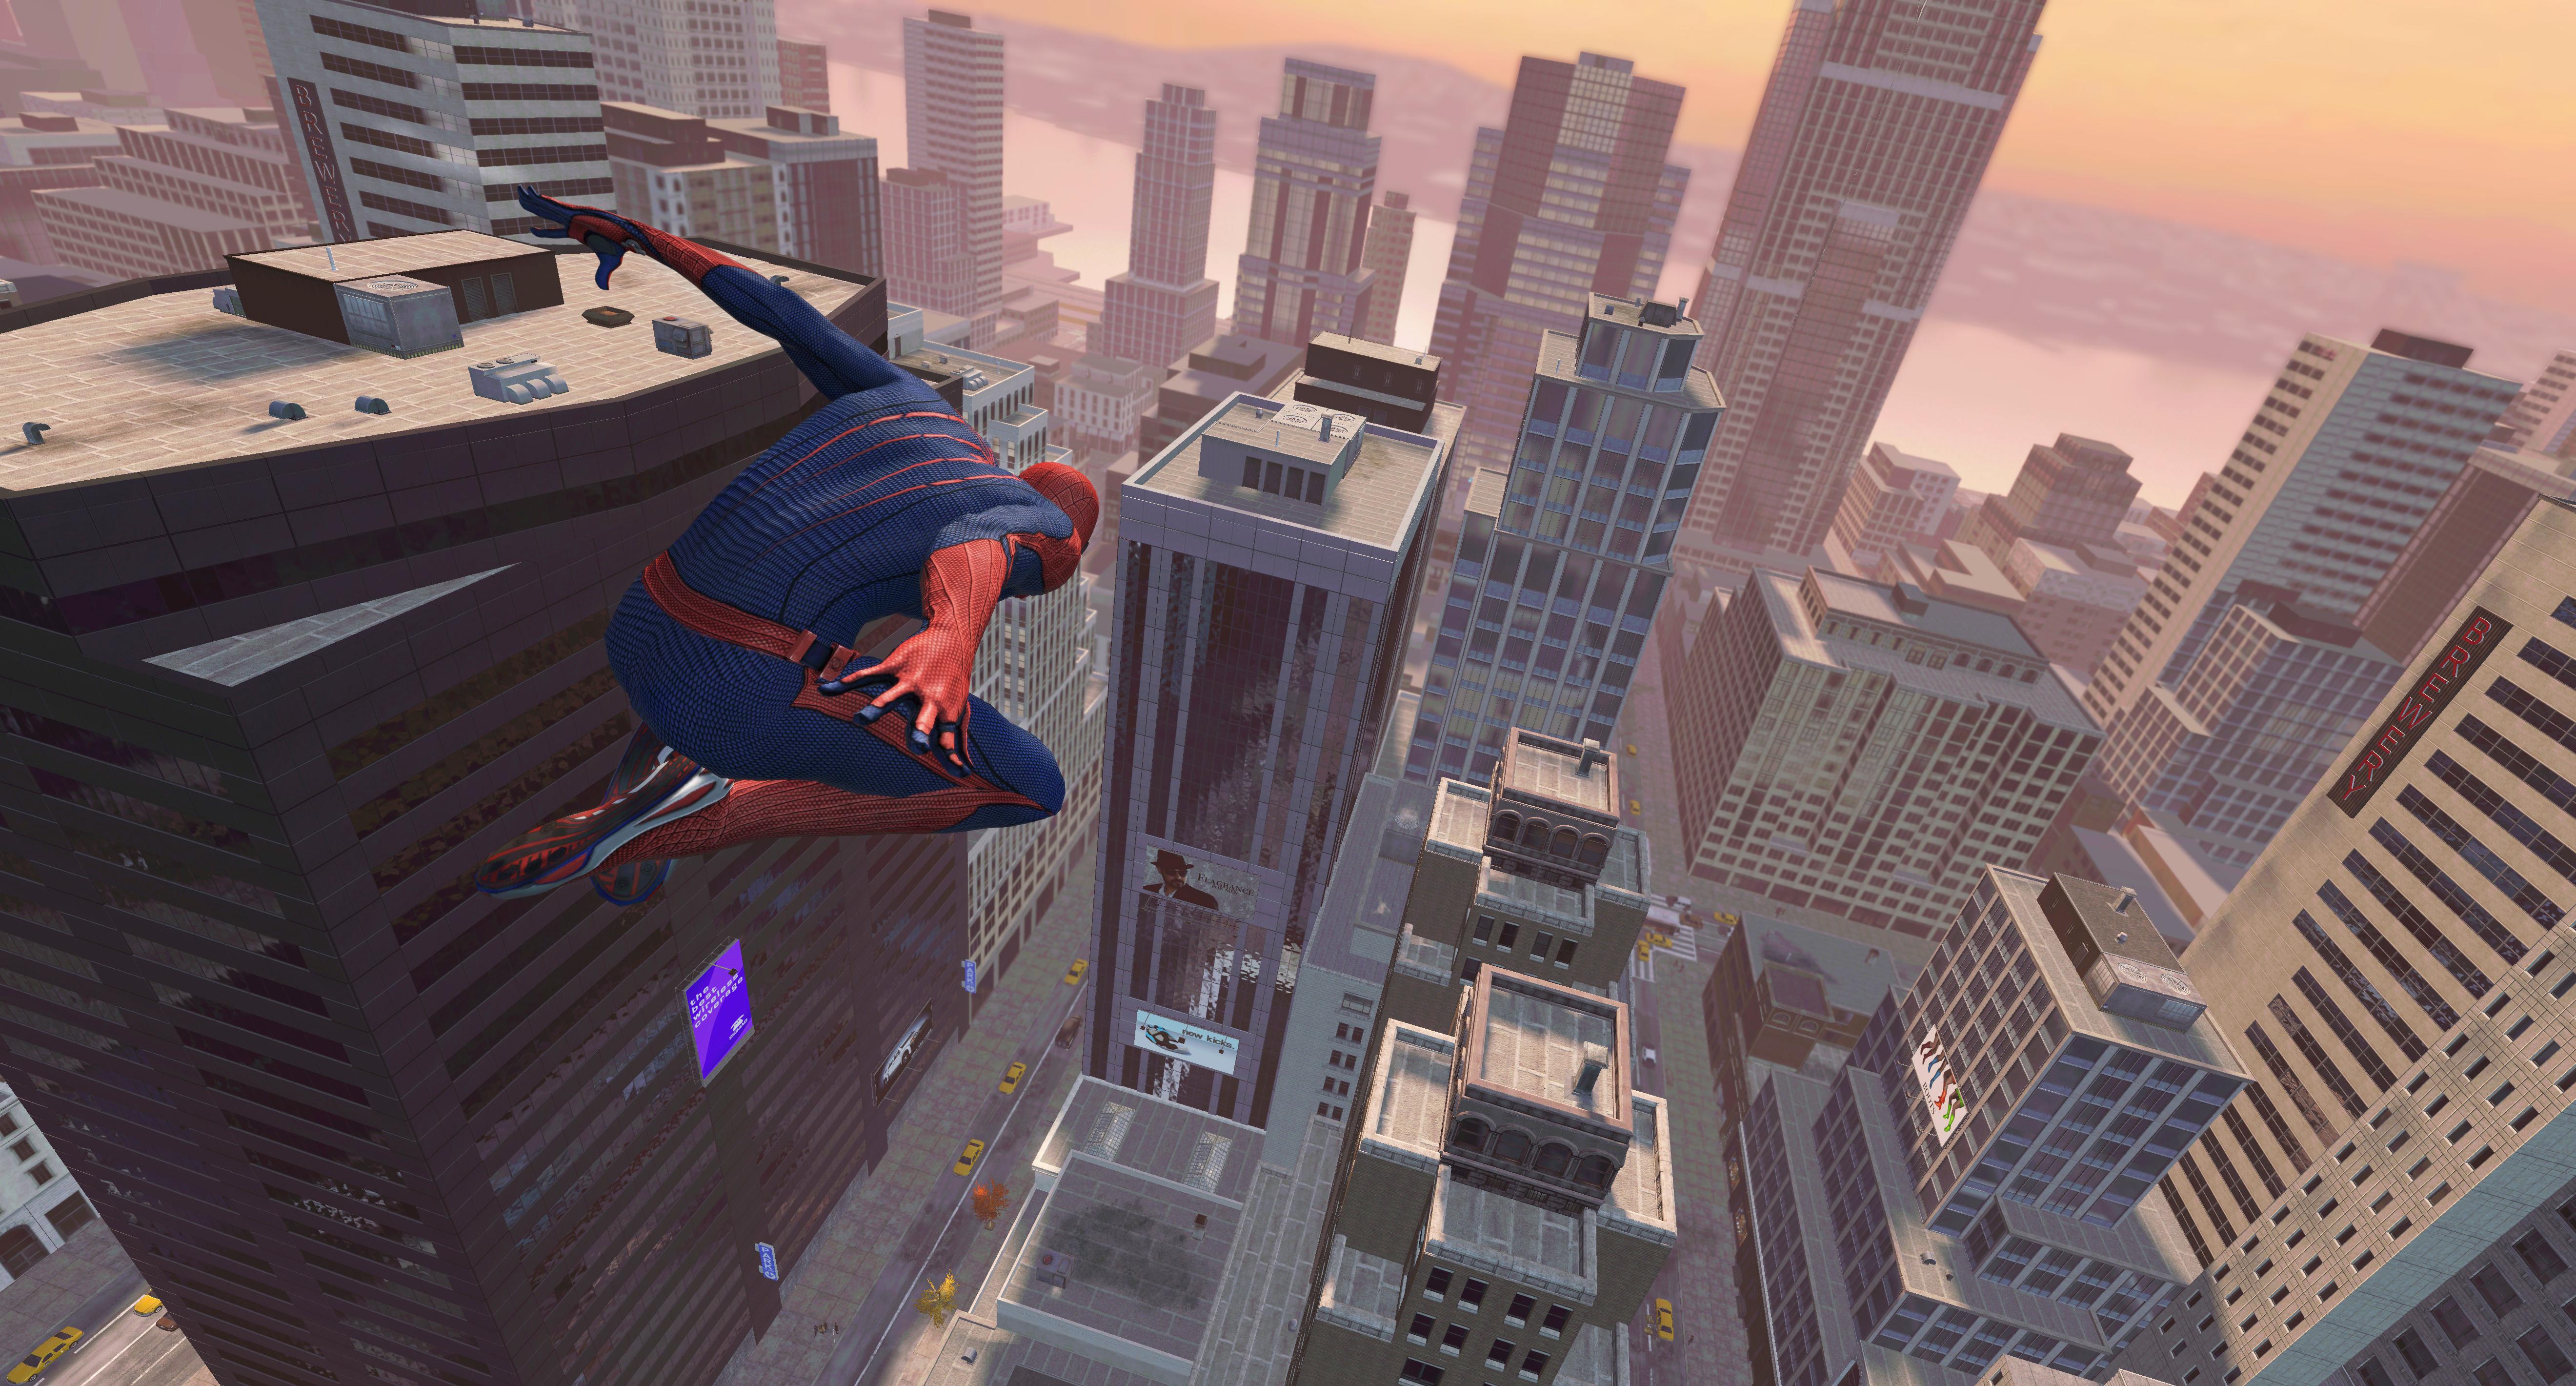 The Amazing Spider-Man Free Download - Rihno Games